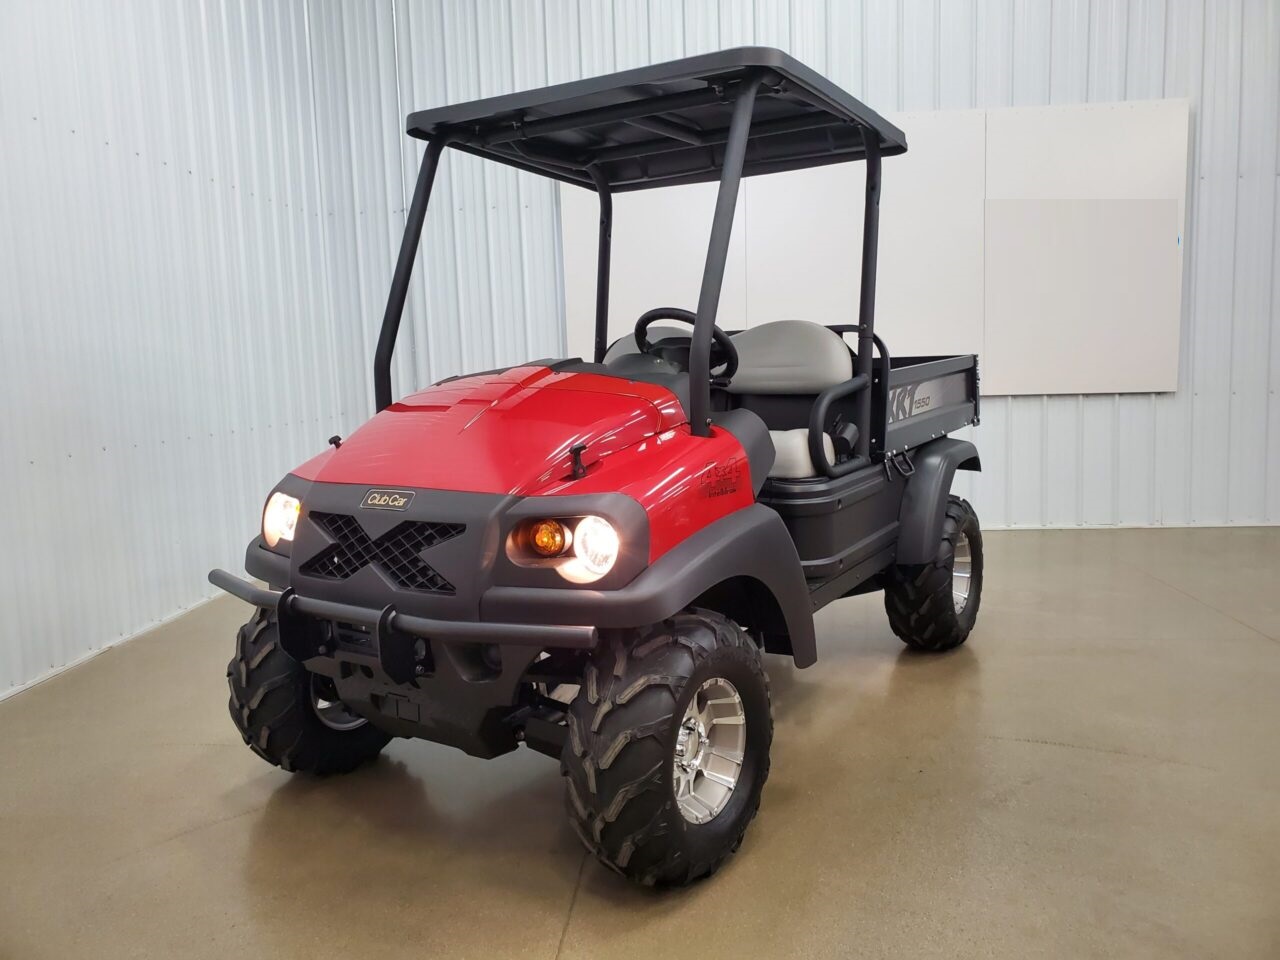 2023 Club Car XRT 1550 Diesel Utility Golf Cart Vehicle, Red For Sale